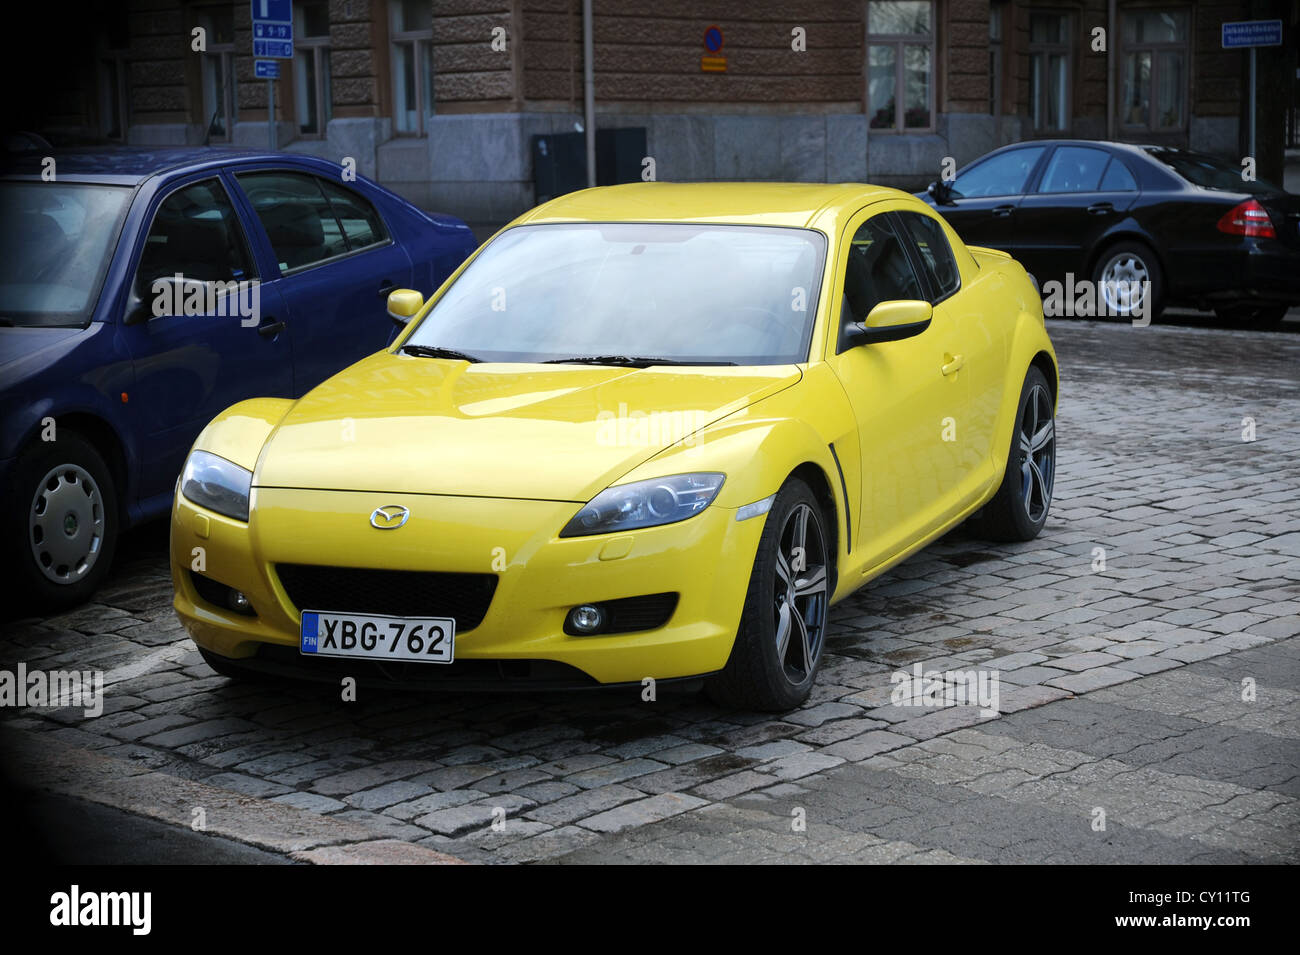 Editorial ** Helsinki, Finland - May 11, 2009 - Yellow Mazda RX-8 sports car powered by unique rotary ('Wankel') engine. Stock Photo